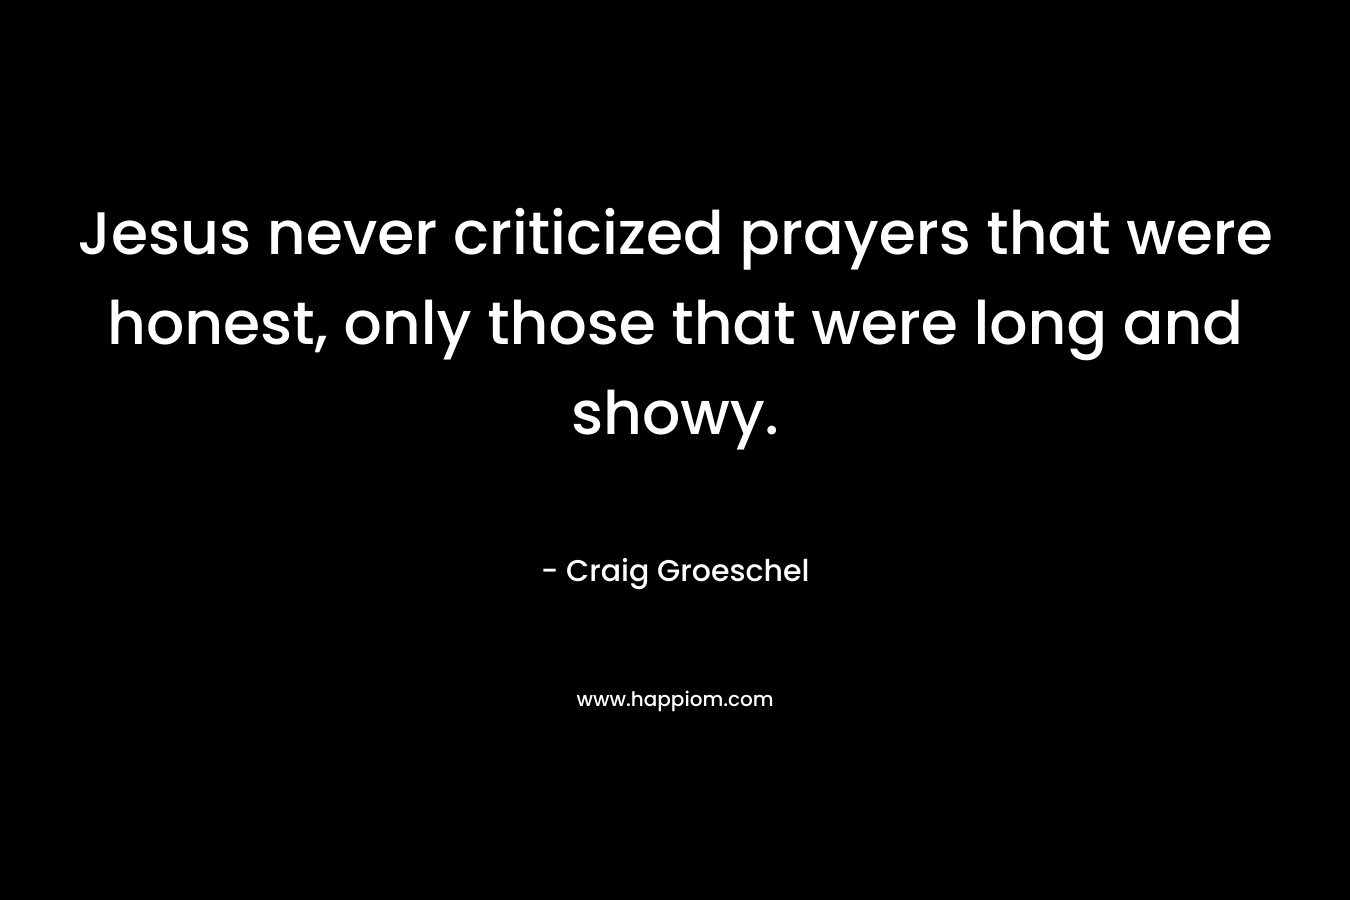 Jesus never criticized prayers that were honest, only those that were long and showy. – Craig Groeschel